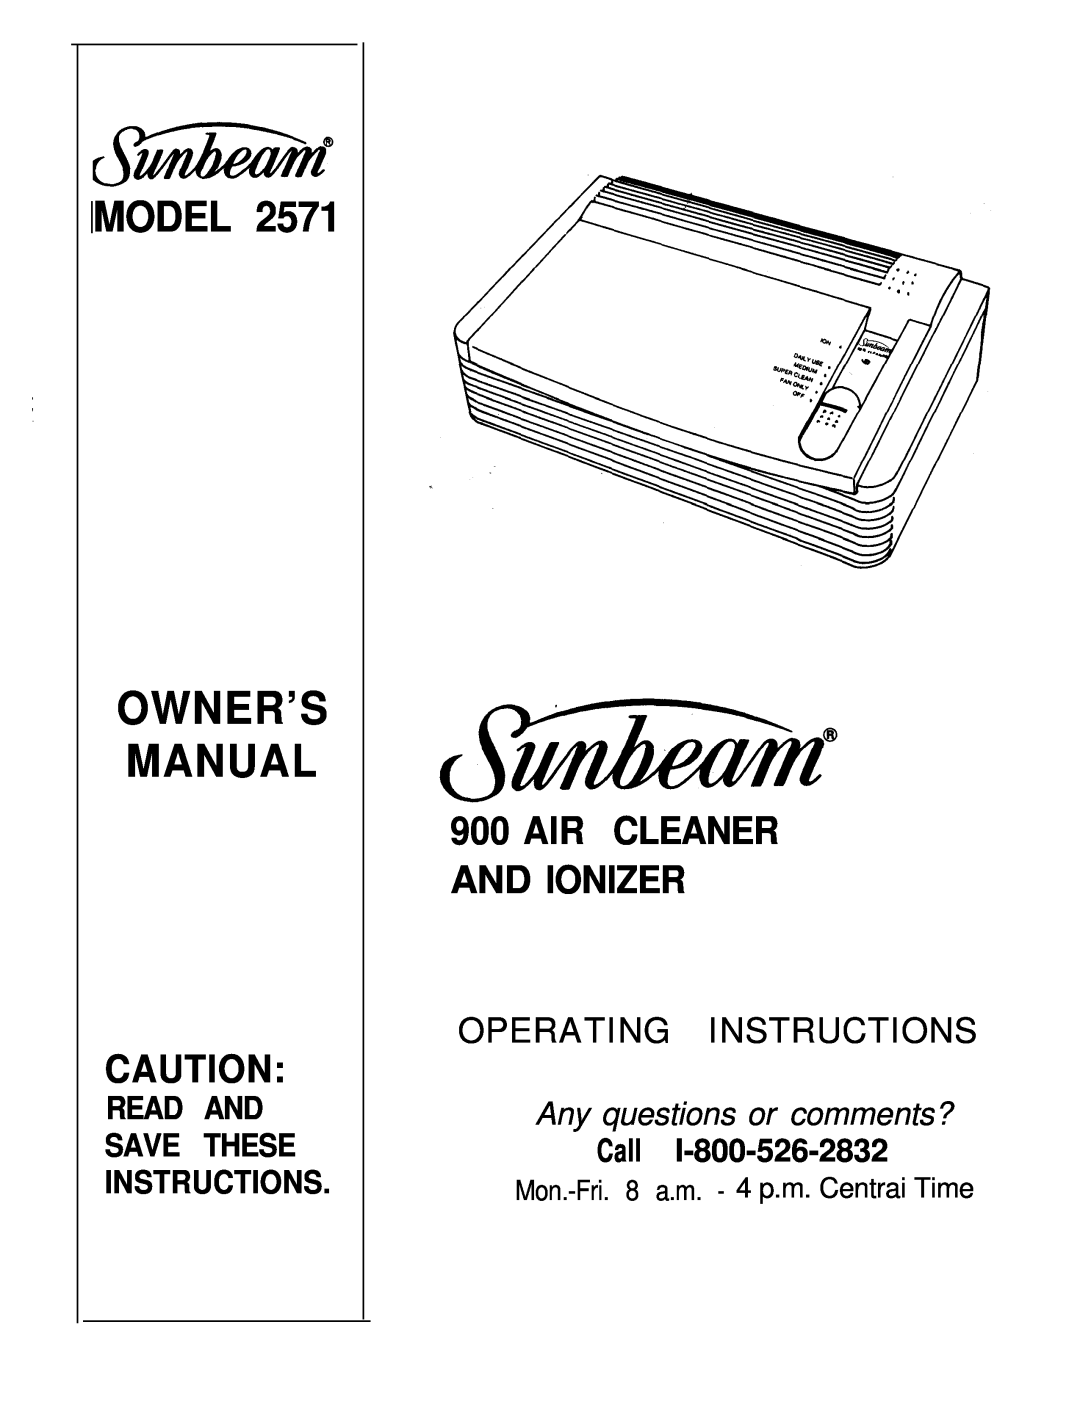 Sunbeam 2571 owner manual Model, Air Cleaner And Ionizer, Operating Instructions, Read And, Any questions or comments? 